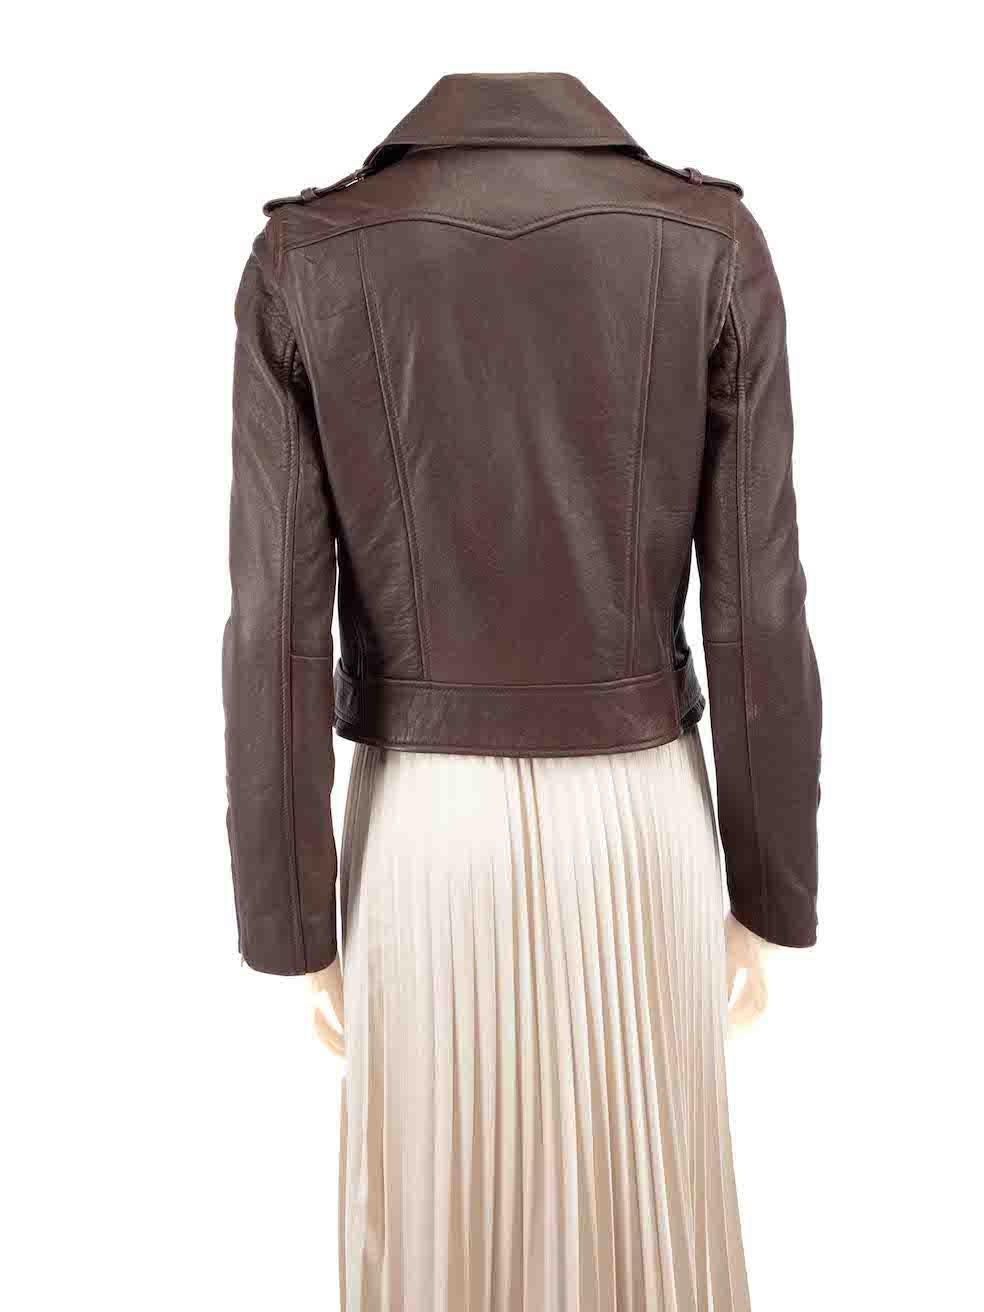 Maje Brown Leather Zipped Biker Jacket Size L In Good Condition For Sale In London, GB